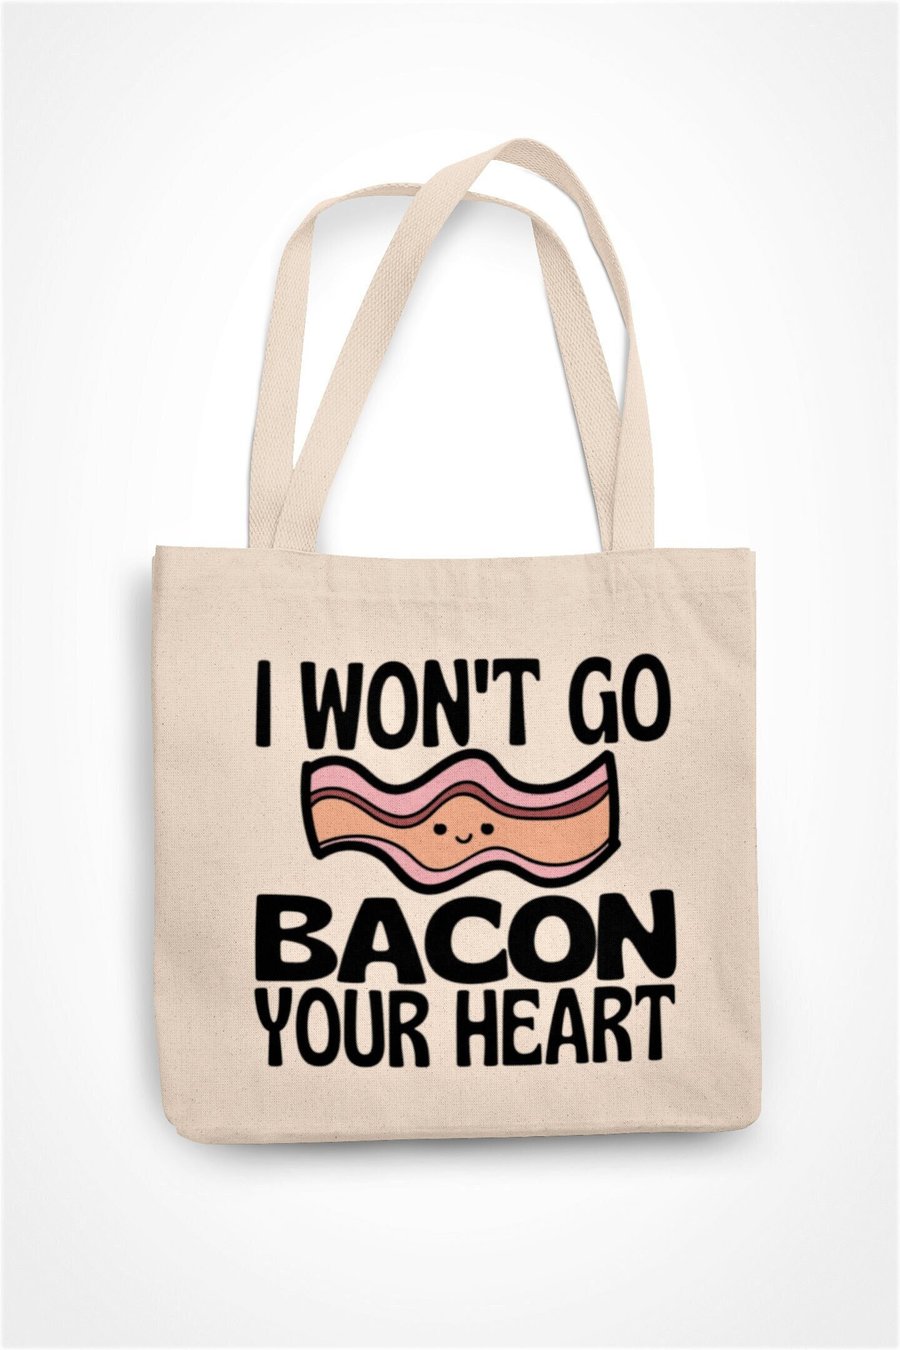 I Won't Go BACON Your Heart Tote Bag- Cute Anniversary Valentine's Gift - Food 